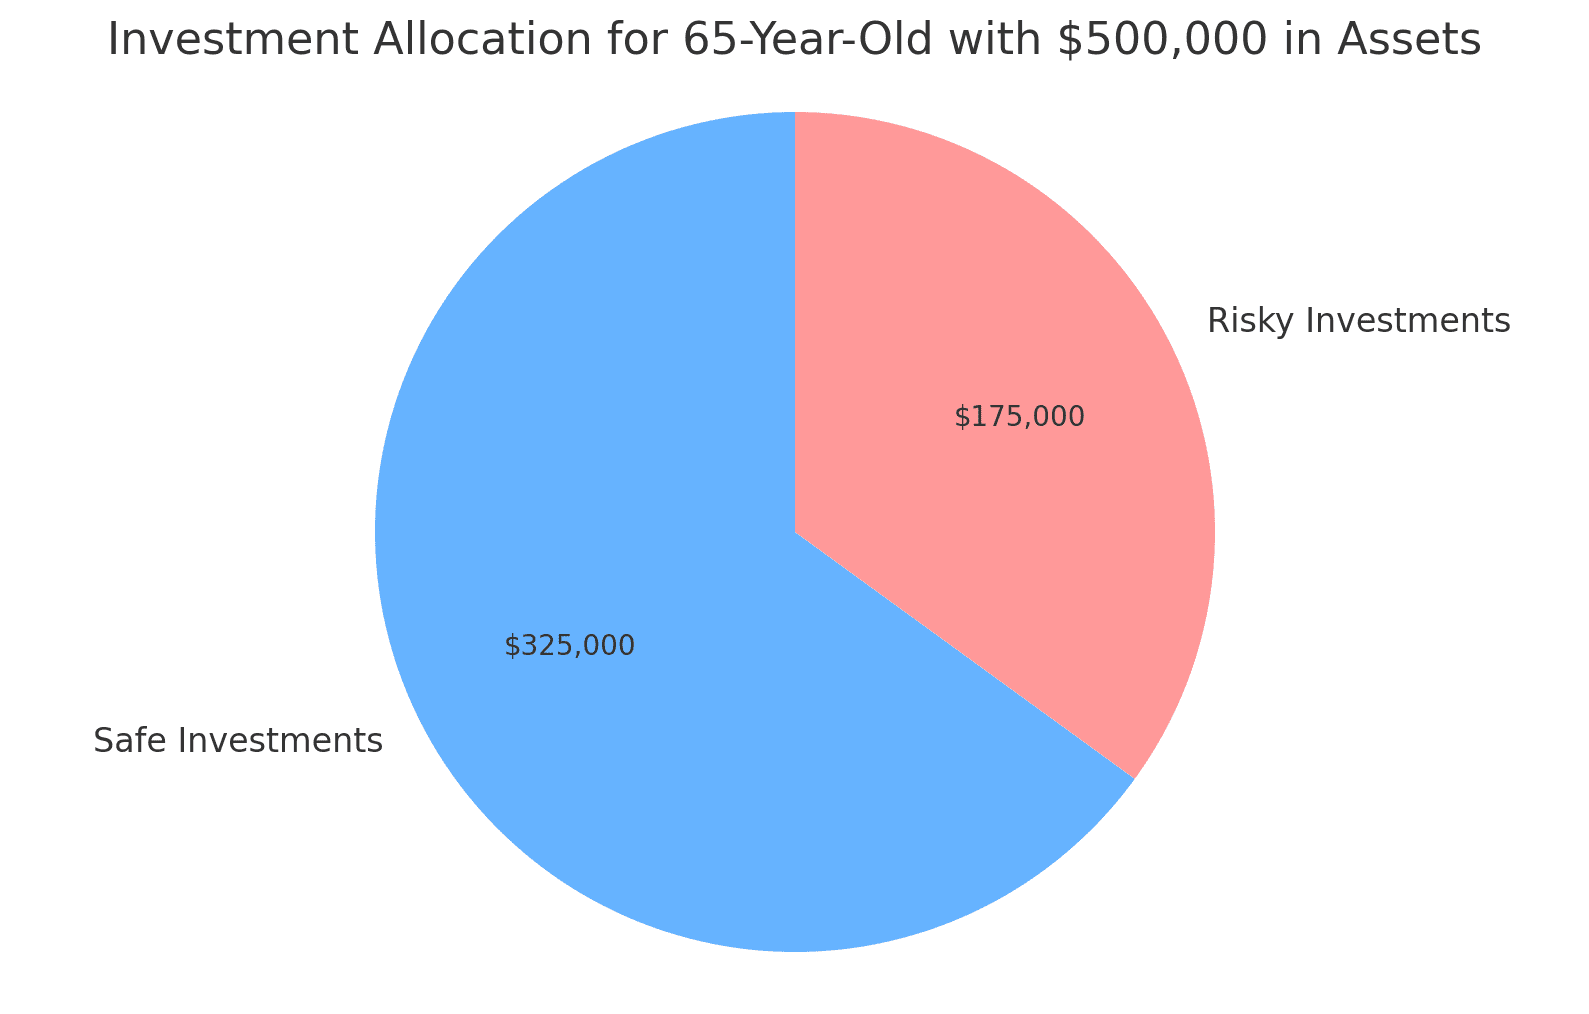 65-Year-Old Investment Allocation